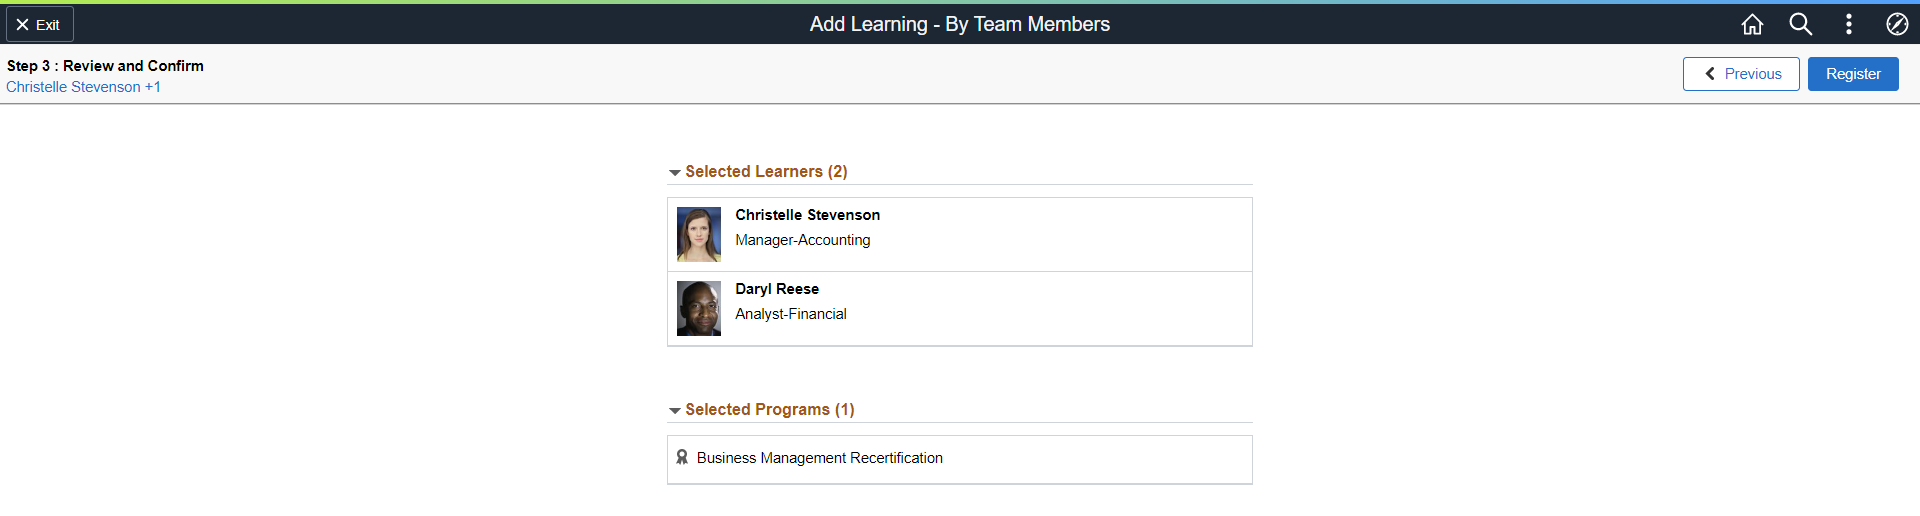 Step 3 of 3 of Add Learning - By Team Members Page